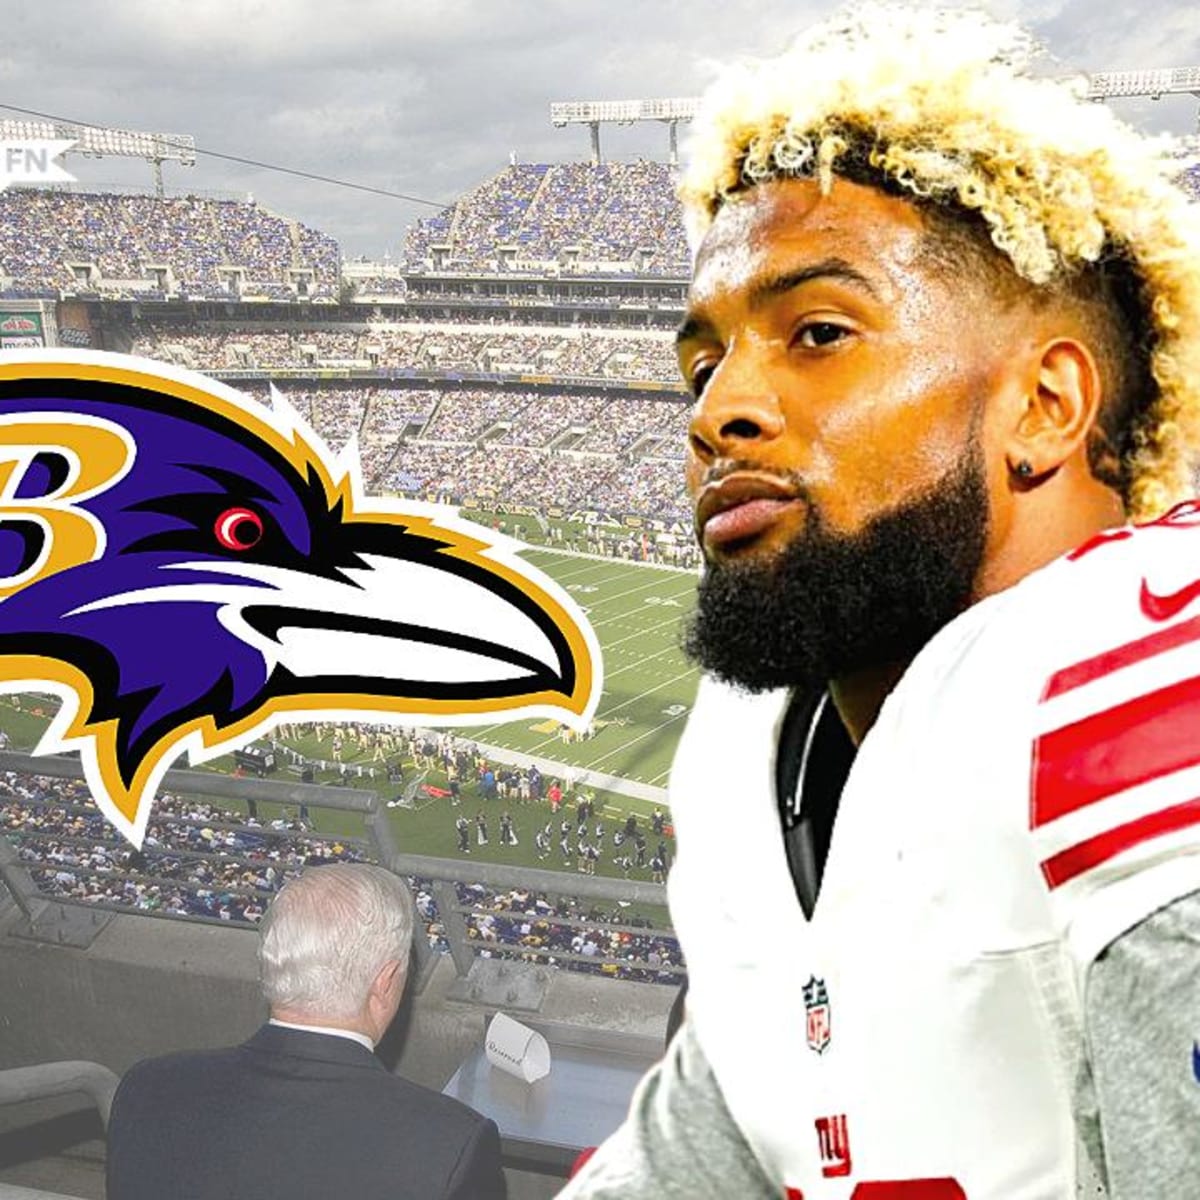 Ravens agree to 1-year deal with Odell Beckham Jr.